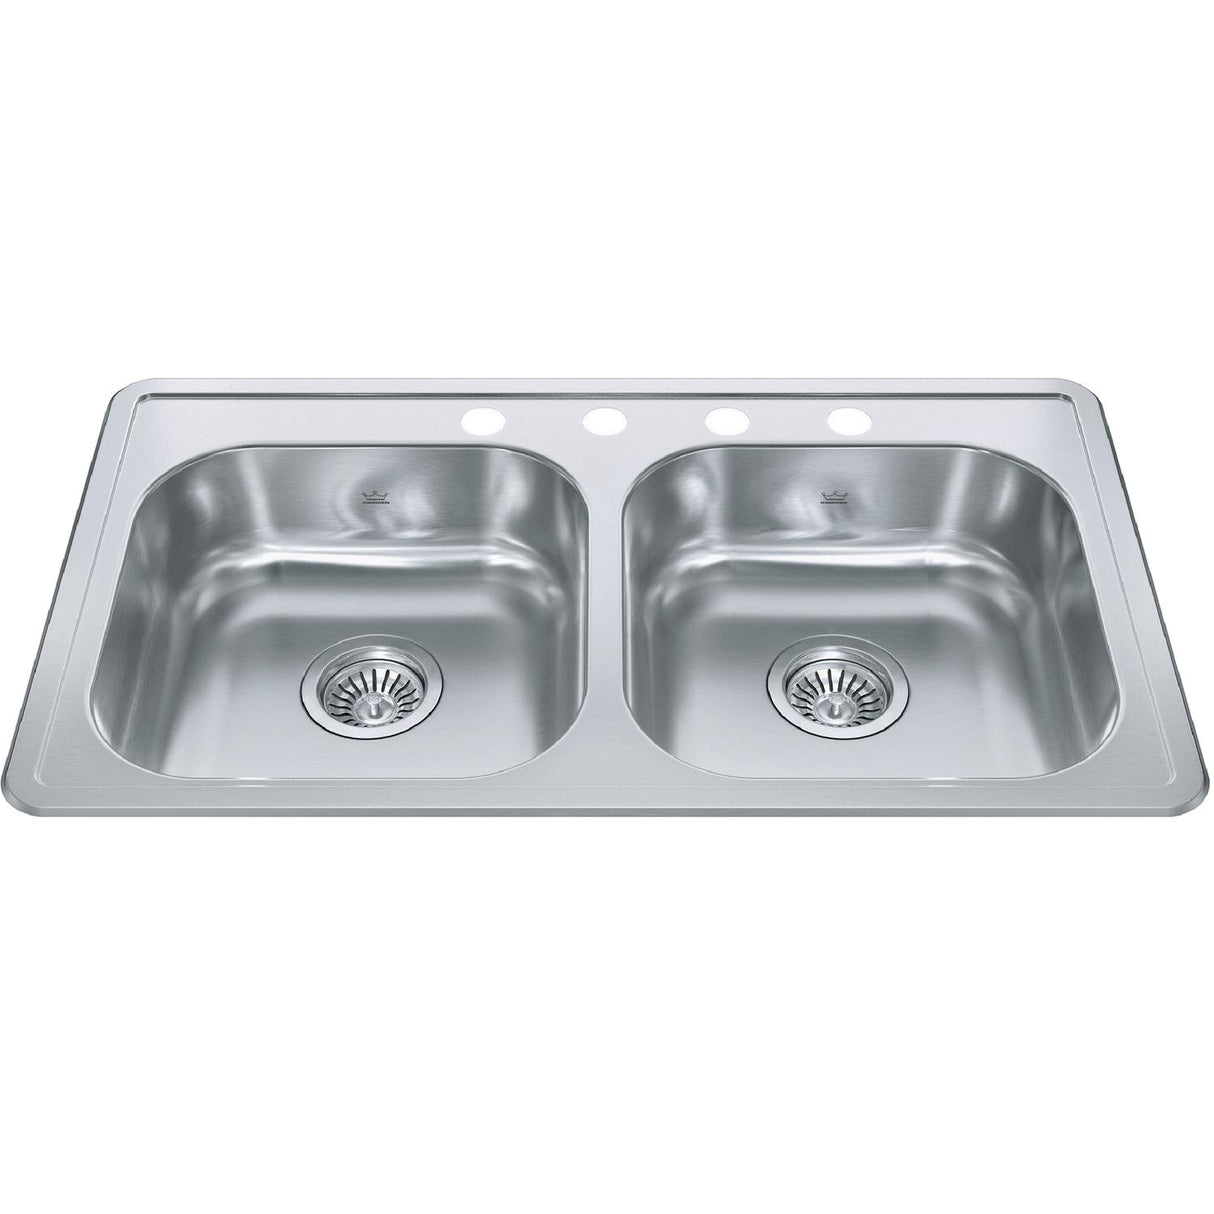 KINDRED RDLA3319-6-4CBN Creemore 32.94-in LR x 18.31-in FB x 6-in DP Drop In Double Bowl 4-Hole Stainless Steel Sink In Commercial Satin Finish